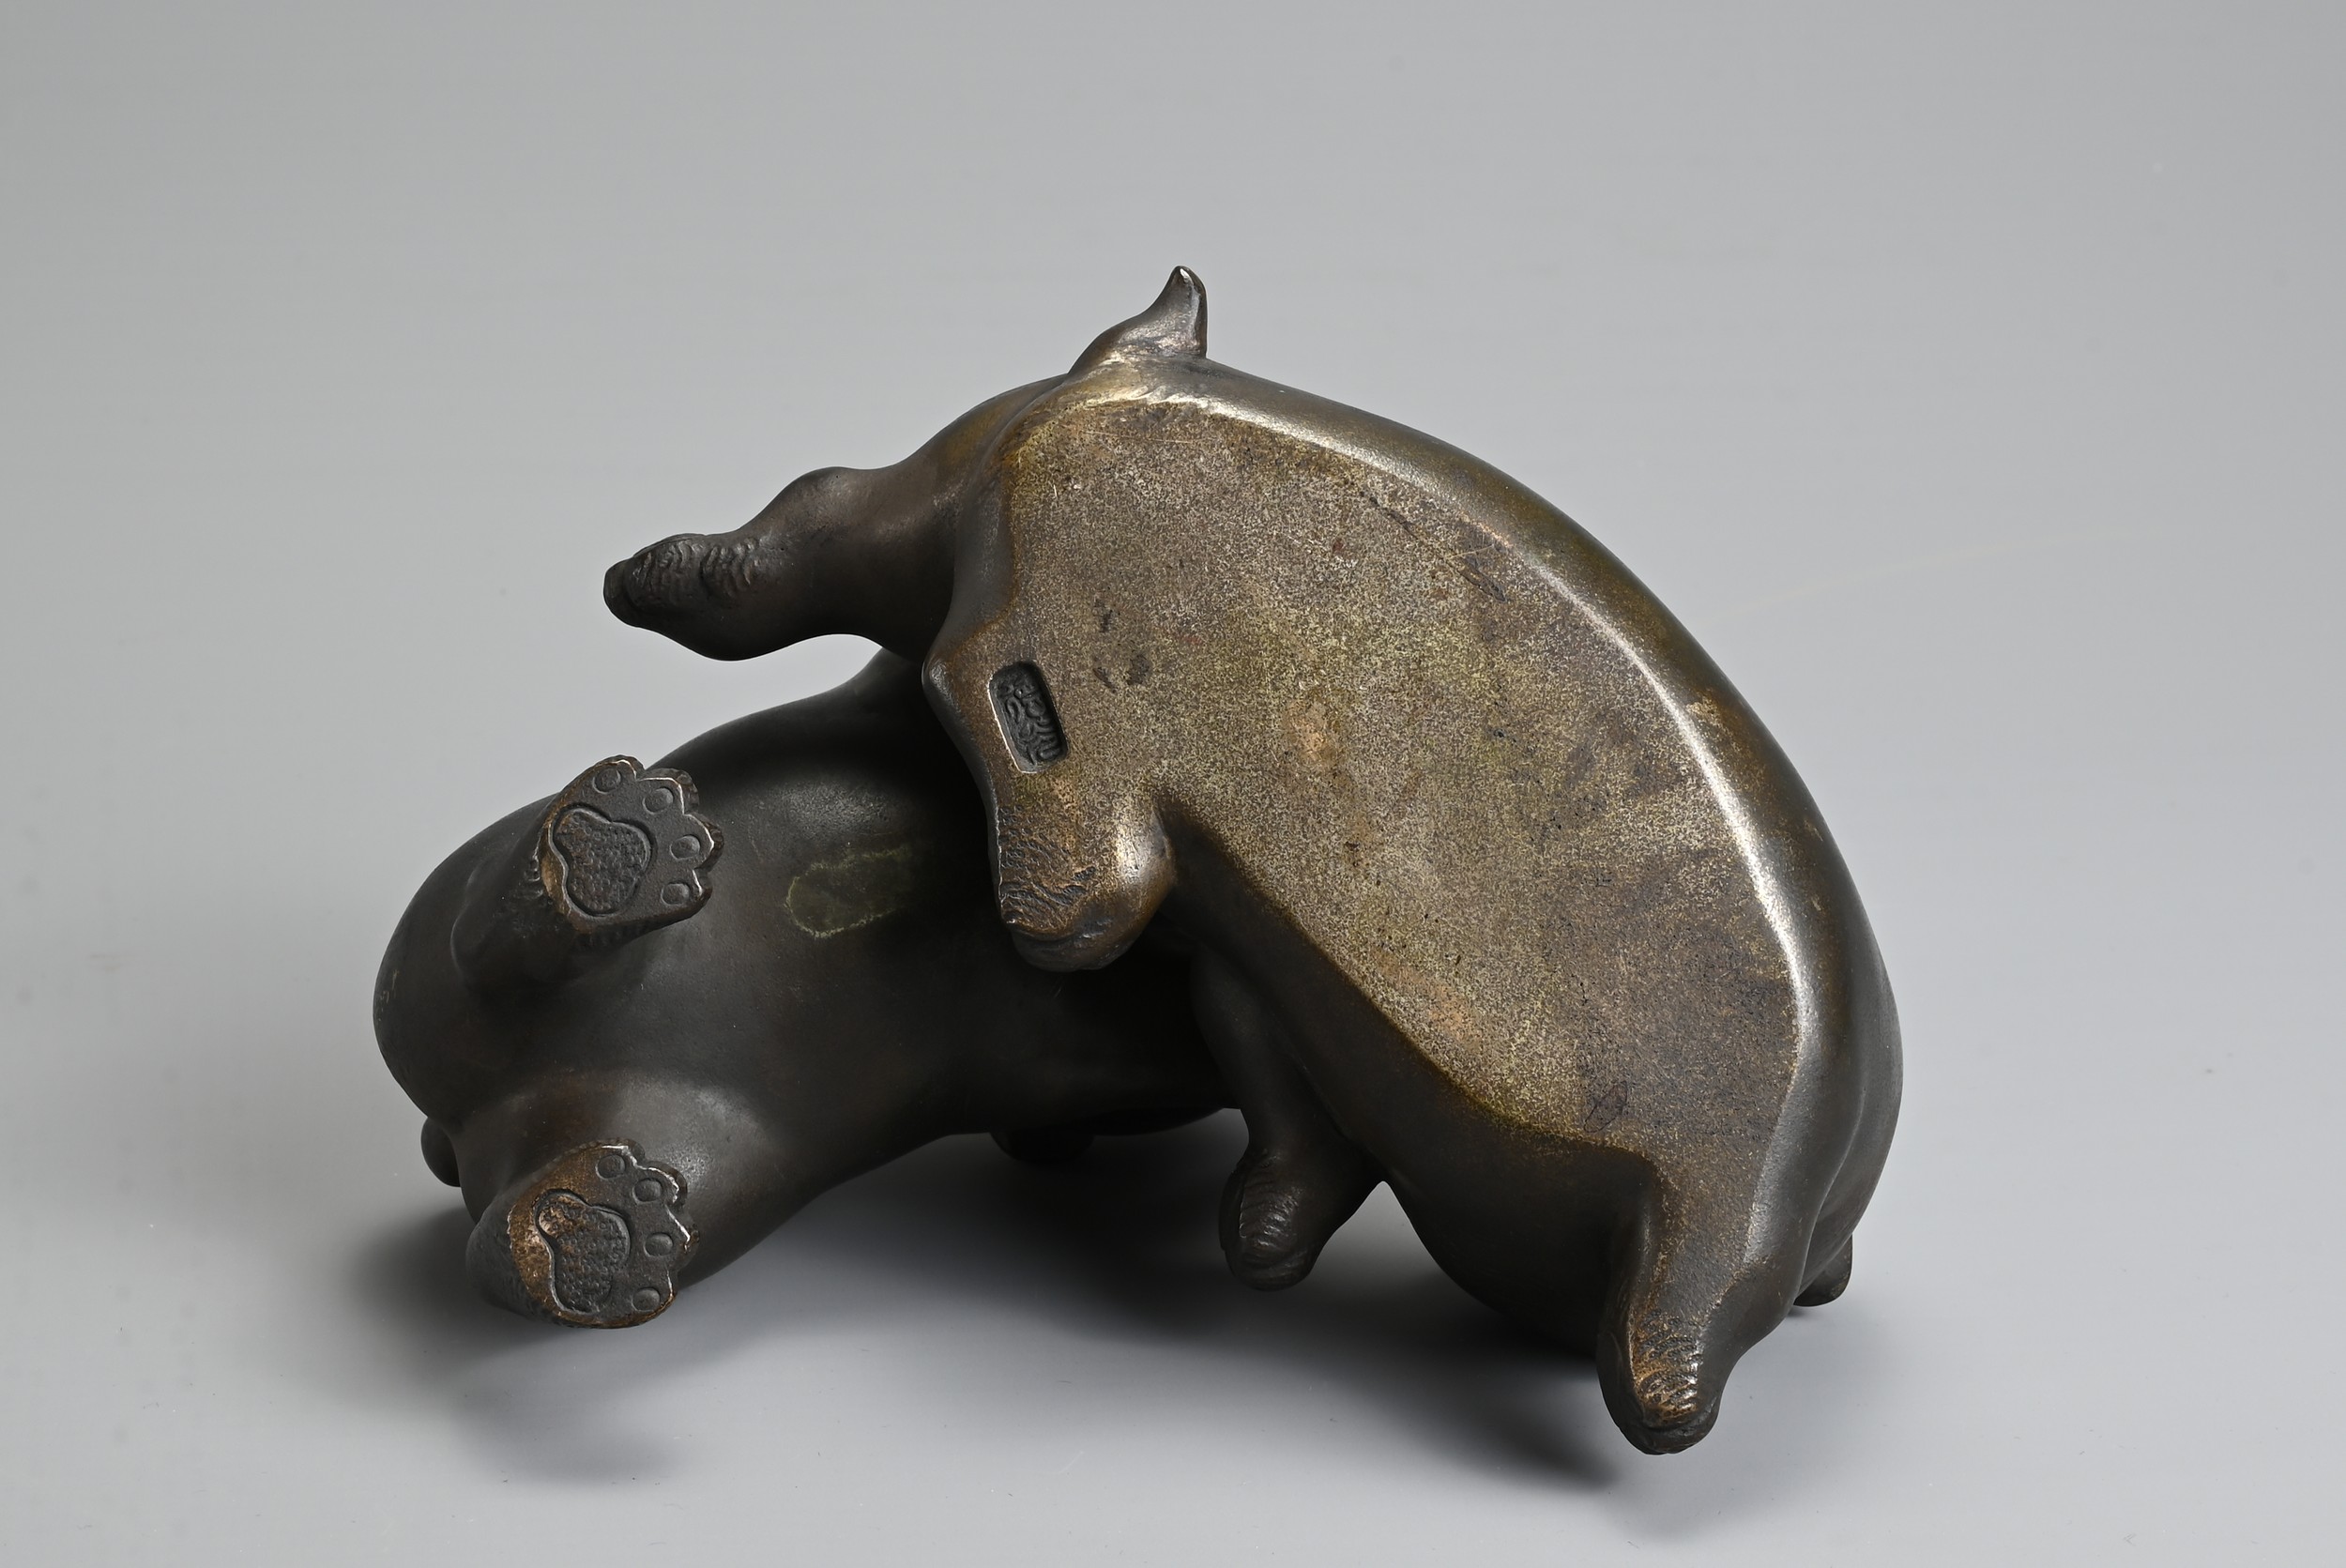 AN EARLY 20TH CENTURY JAPANESE BRONZE OF TWO PUPPIES PLAYING. Signed Tokutani with seal mark to - Image 6 of 7